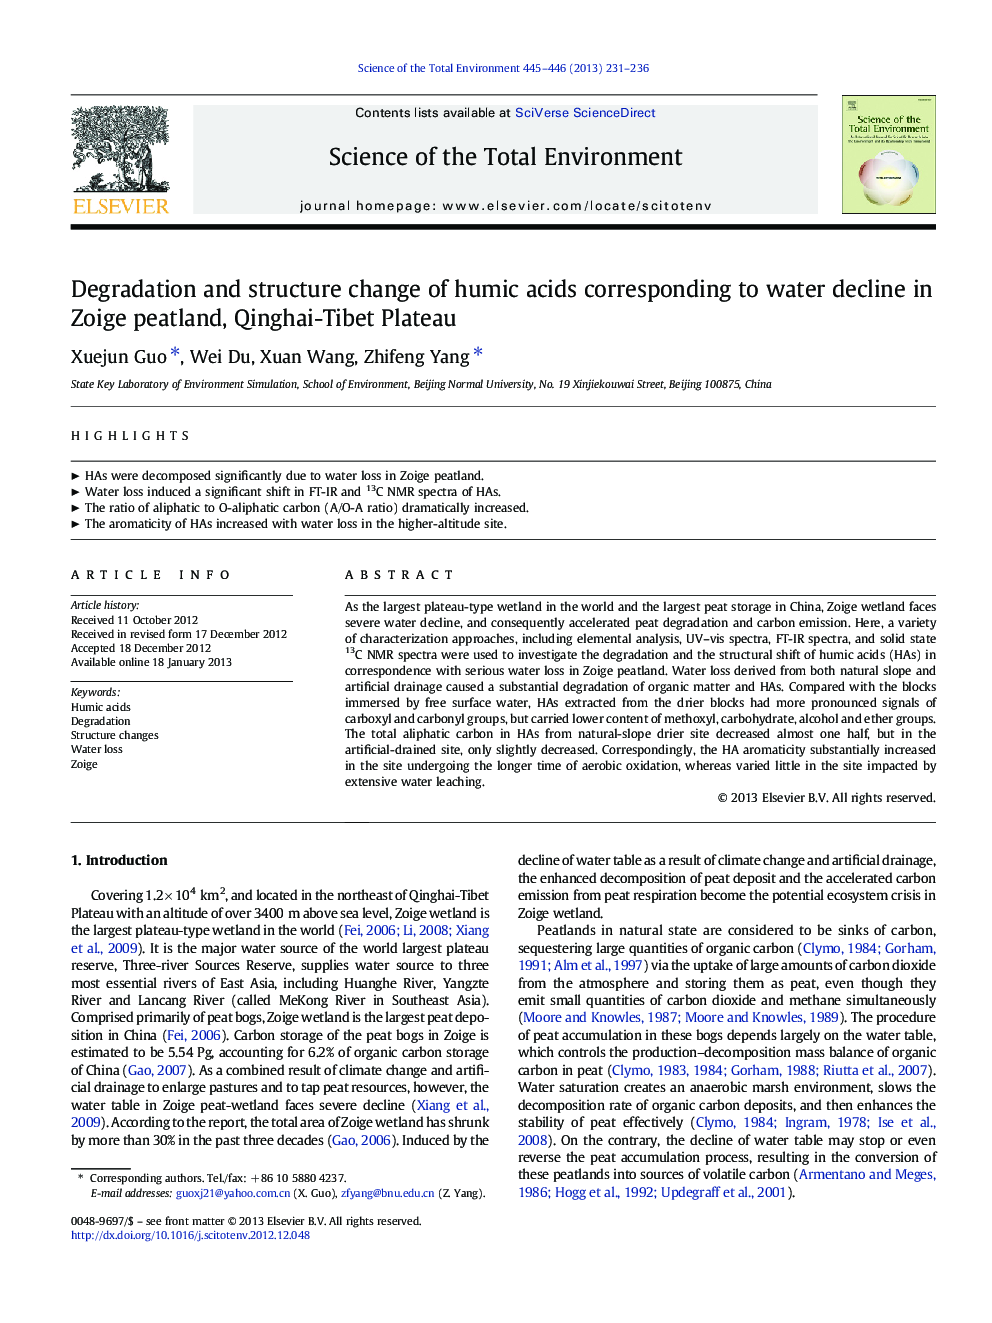 Degradation and structure change of humic acids corresponding to water decline in Zoige peatland, Qinghai-Tibet Plateau